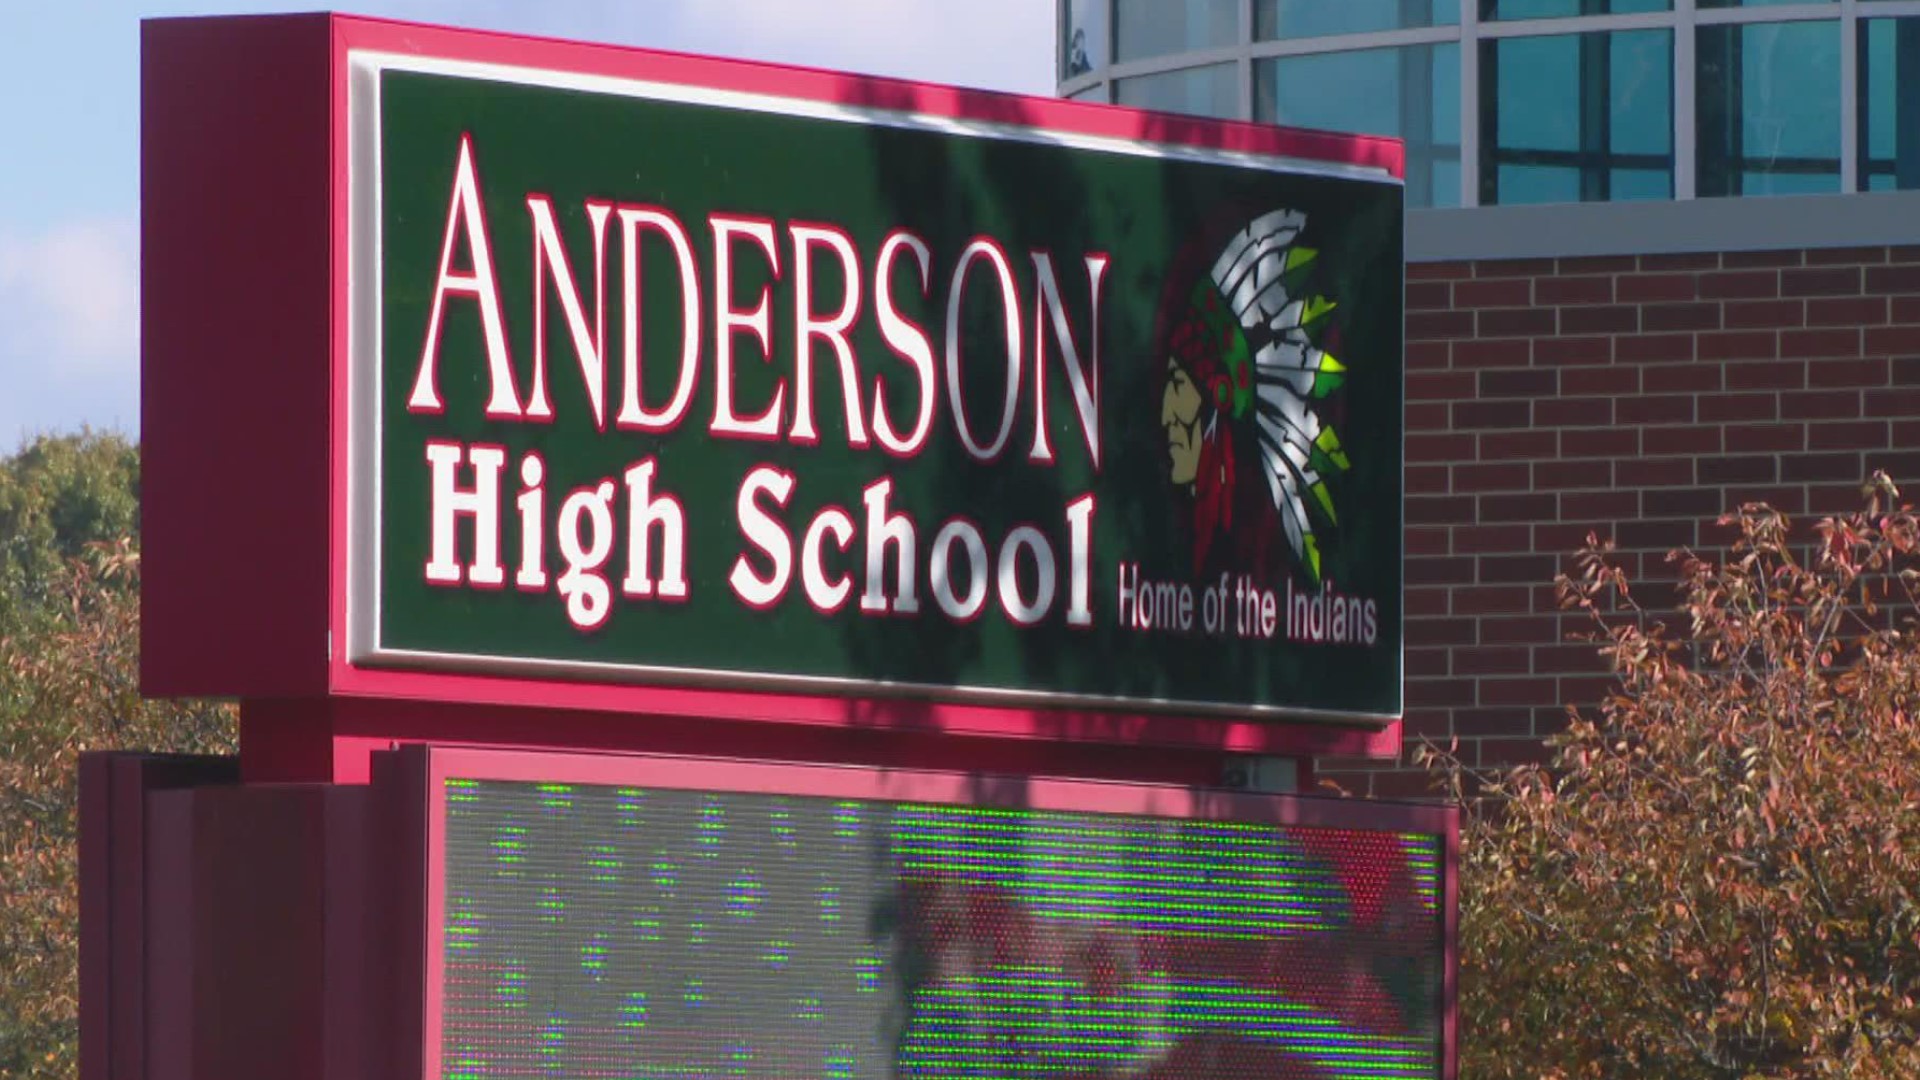 Anderson Schools were closed for third day Wednesday with no option for e-learning because a large number of teachers called off work.